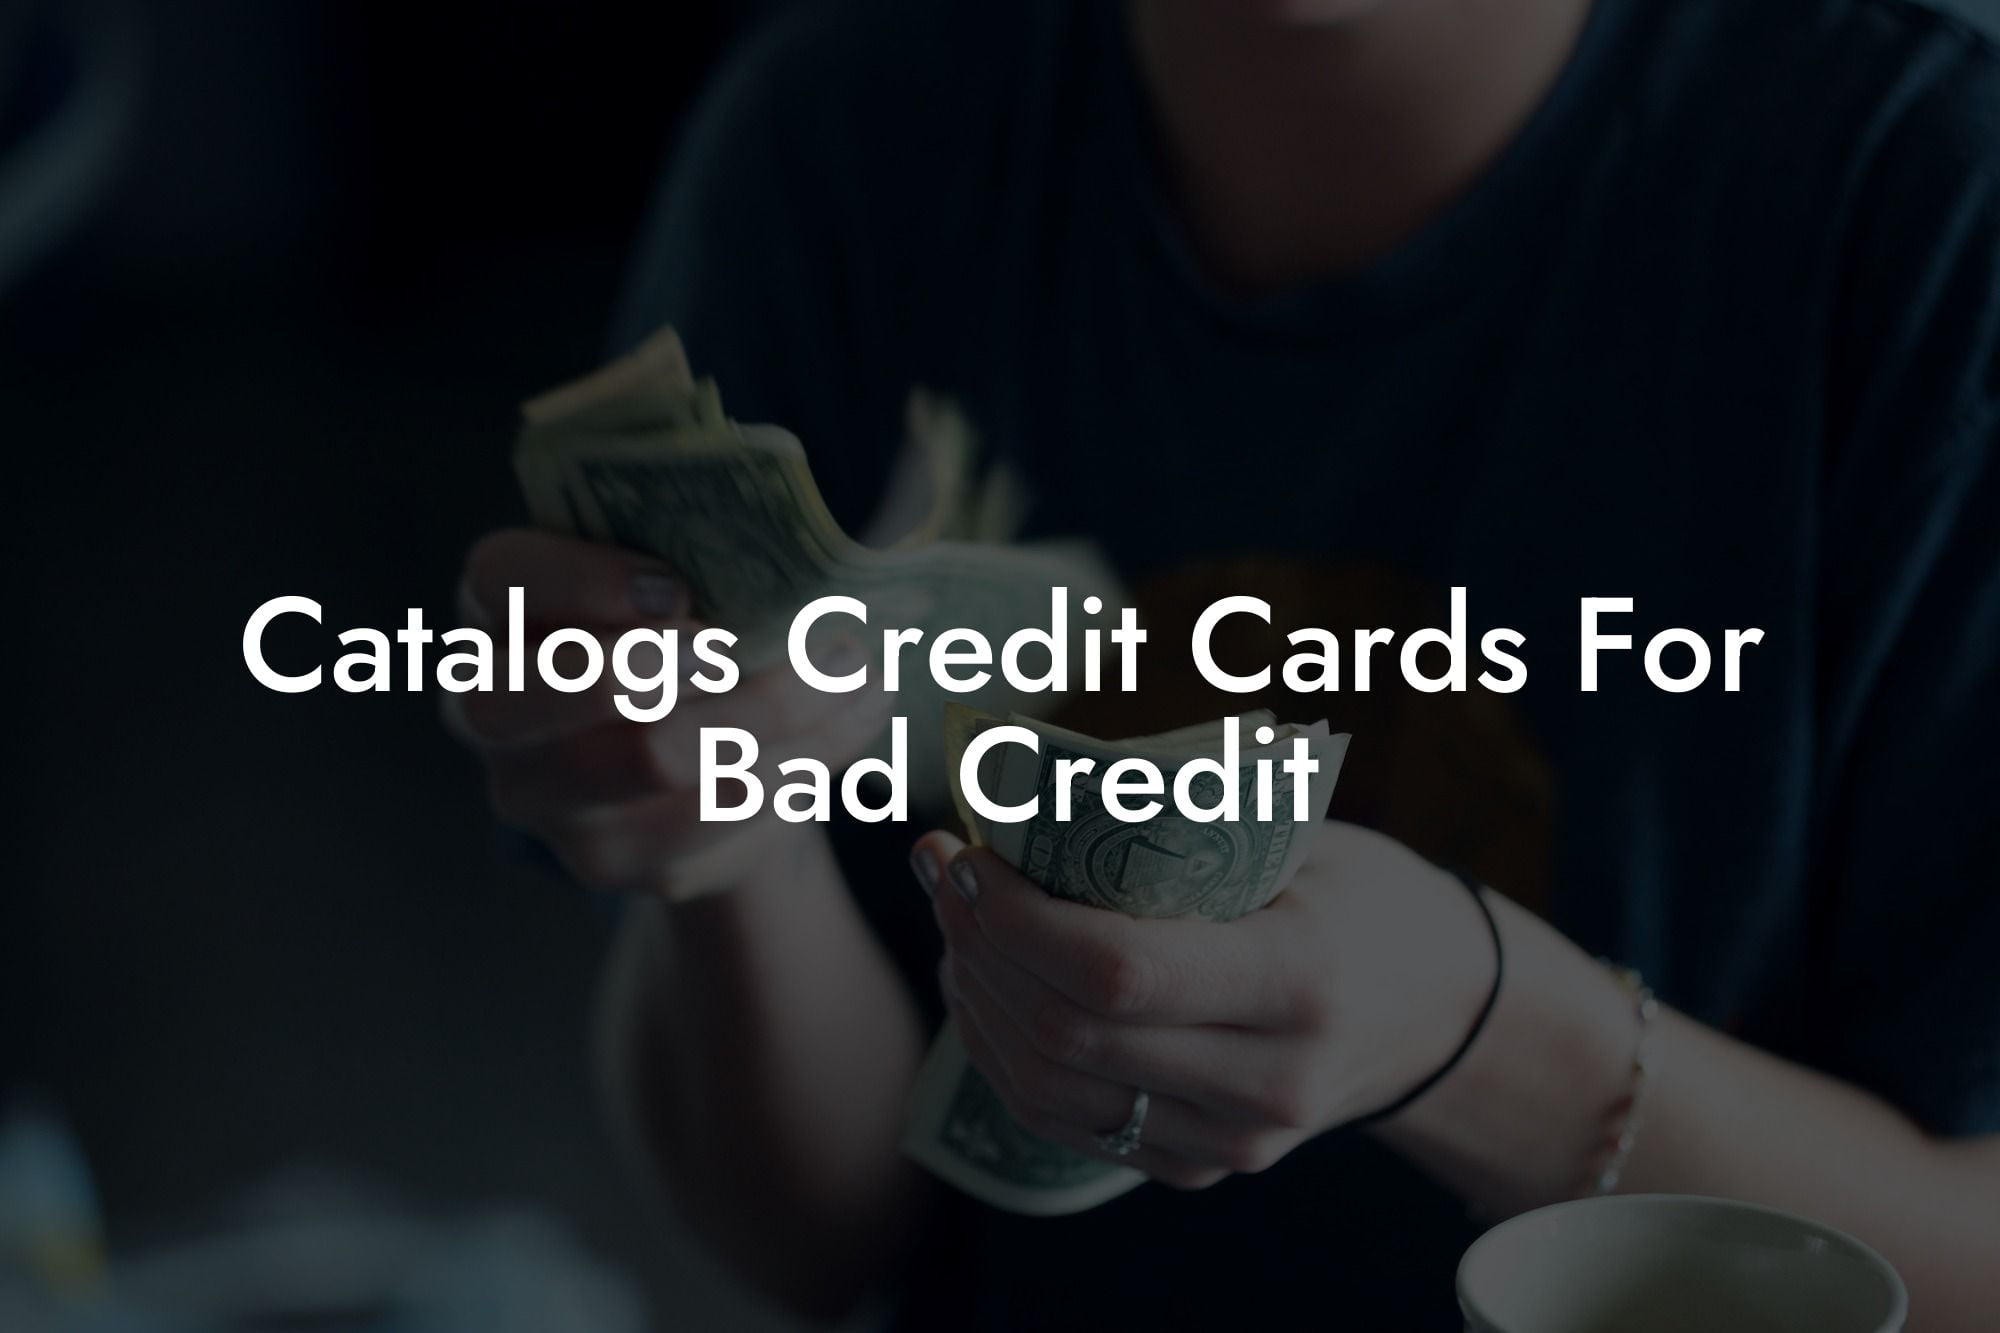 Catalogs Credit Cards For Bad Credit